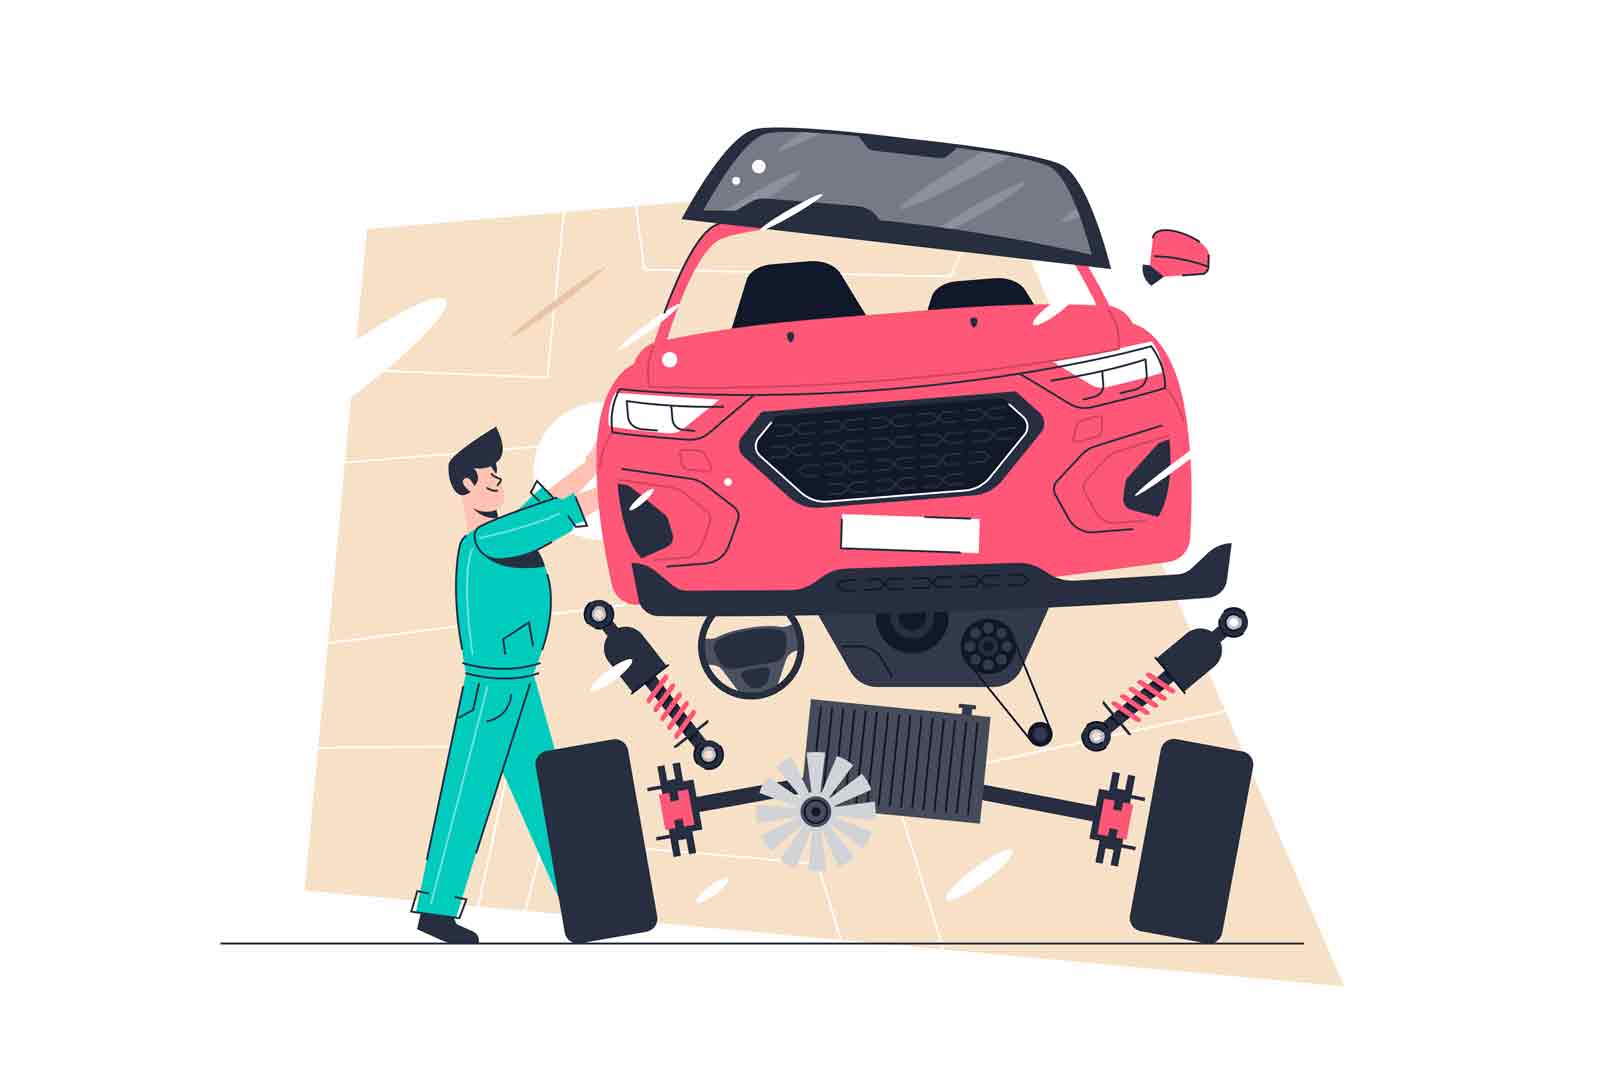 Car repair service, auto diagnostic or maintenance station vector illustration. Automotive technician repairing car in workshop. Auto assembly or disassembly